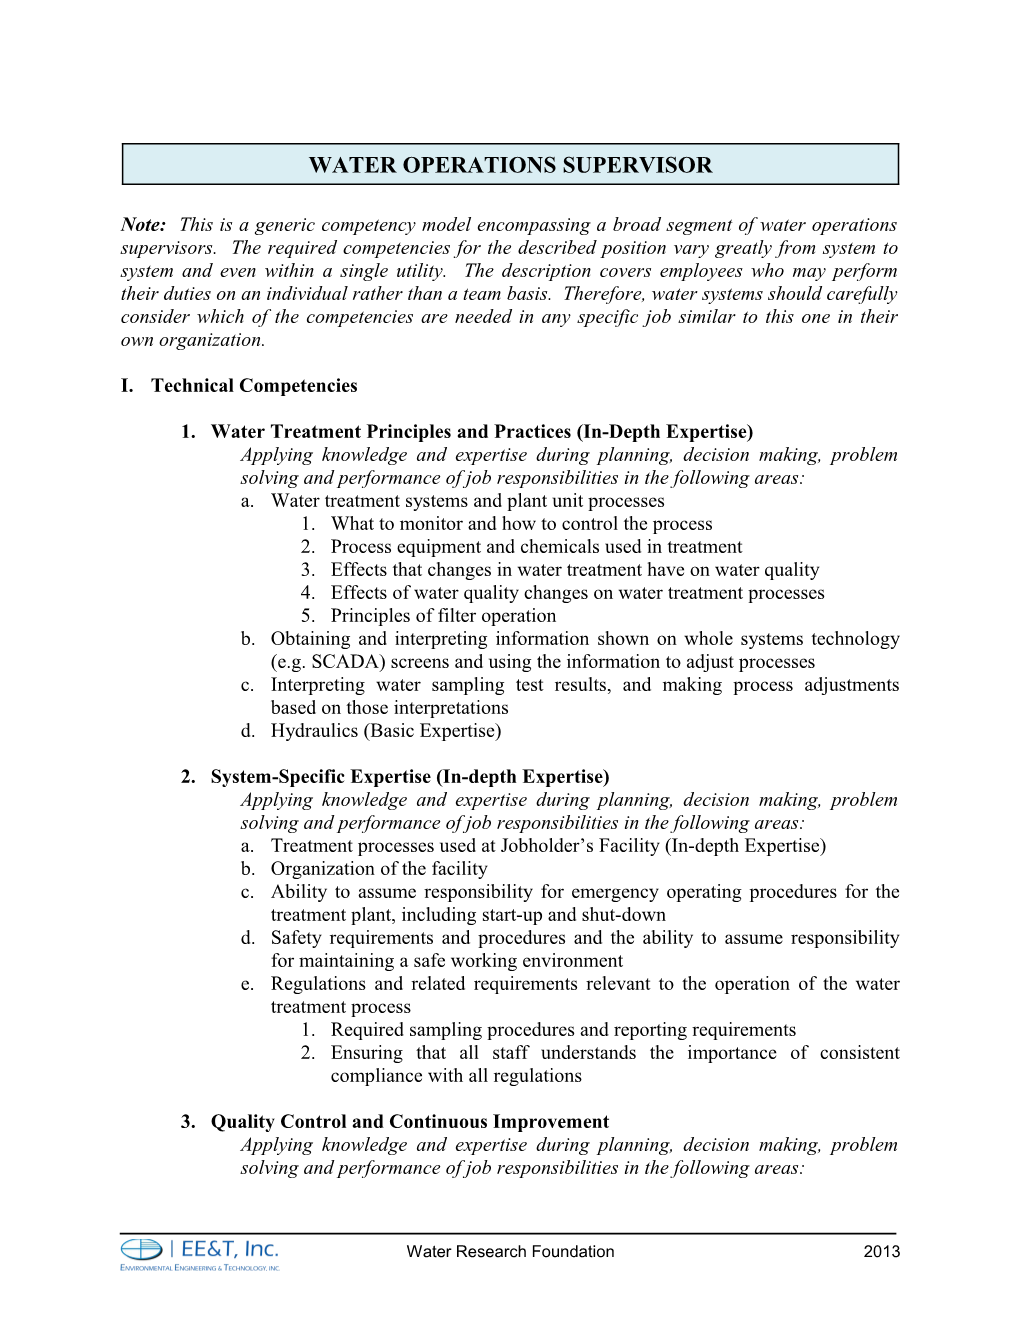 WRF Competency Model: Water Operations Supervisorpage1